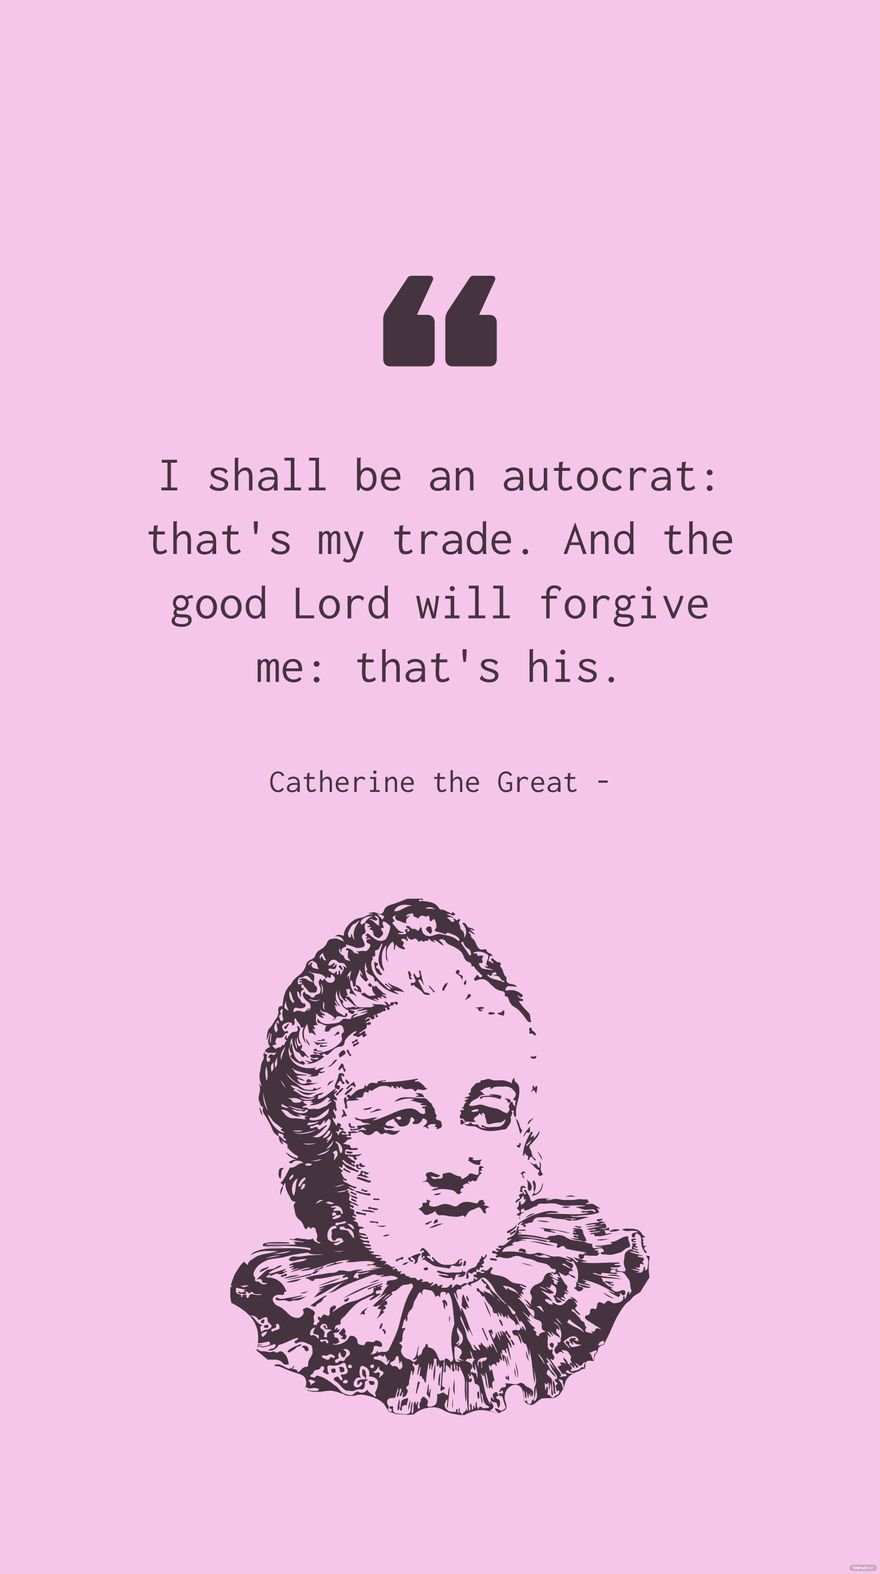 Catherine the Great - I shall be an autocrat: that's my trade. And the good Lord will forgive me: that's his.